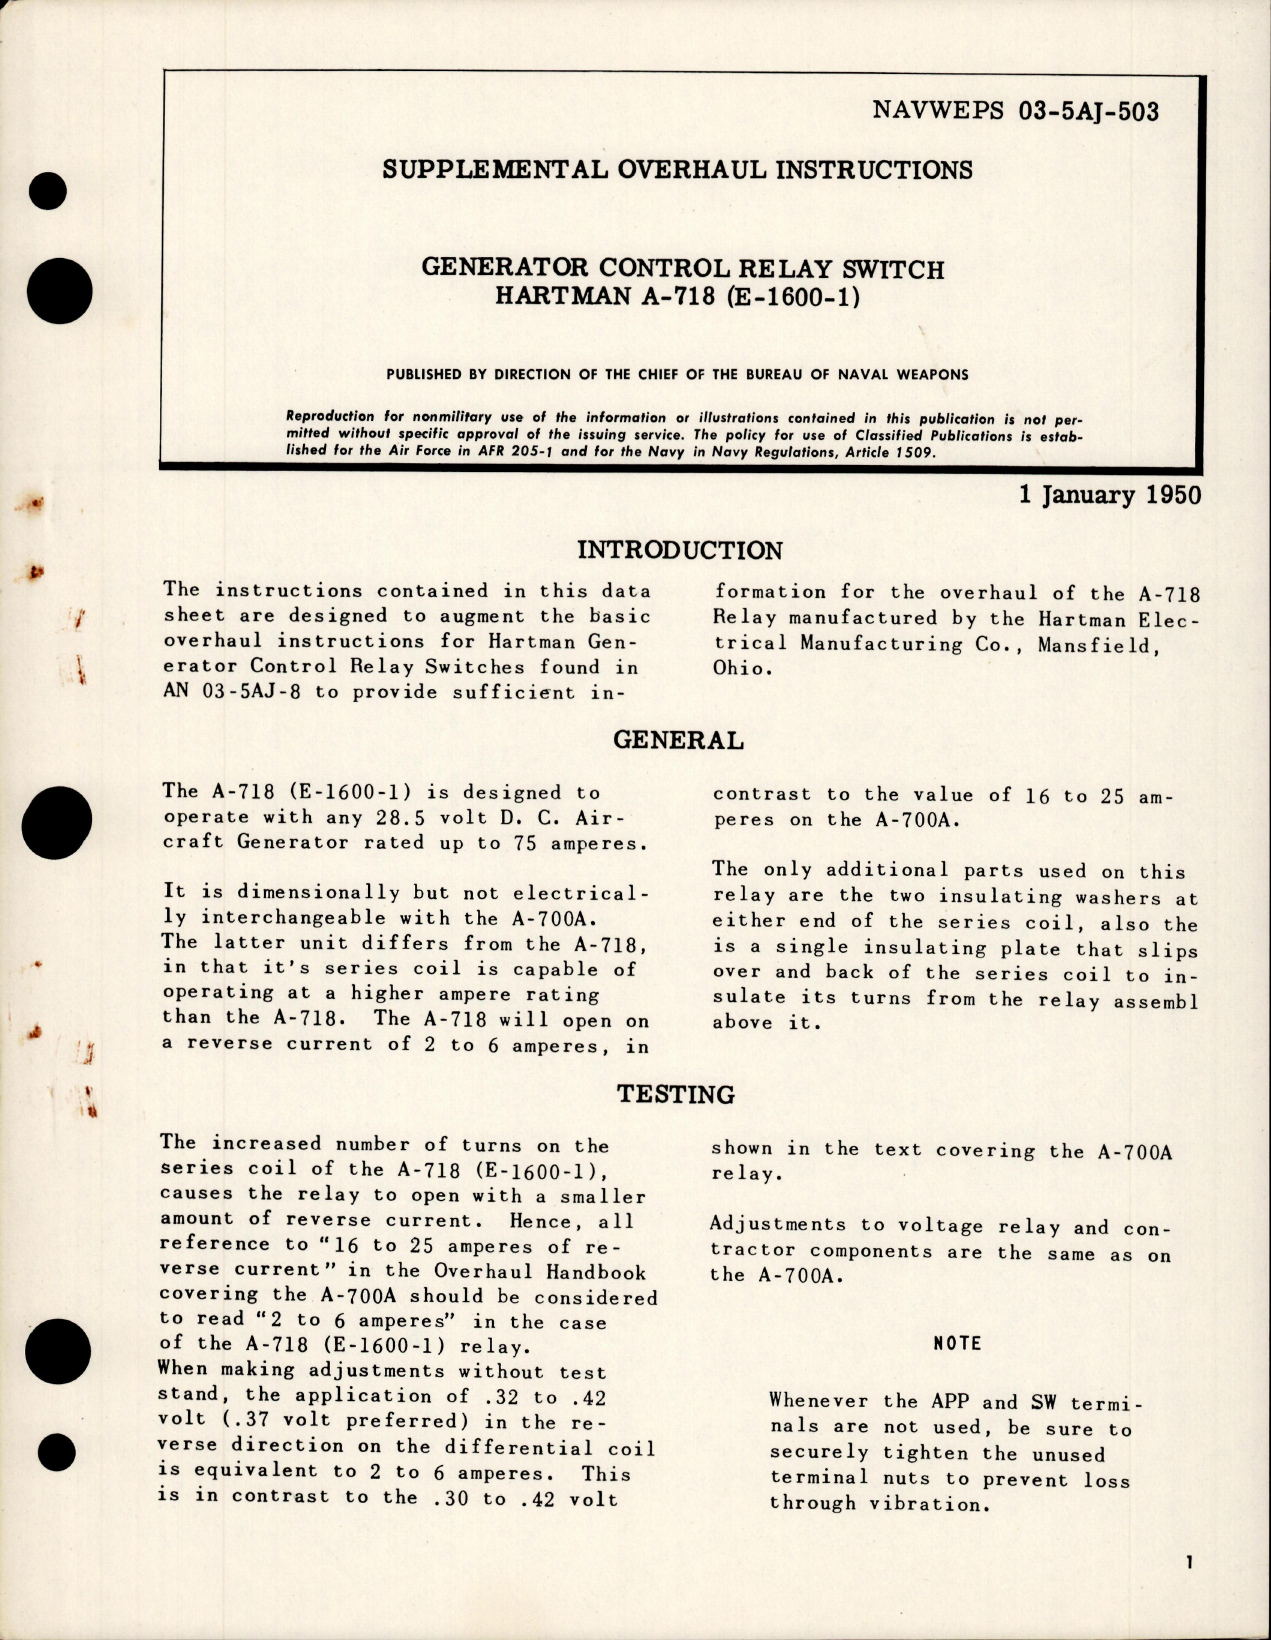 Sample page 1 from AirCorps Library document: Supplement Overhaul Instructions to Generator Control Relay Switch - A718 - E-1600-1